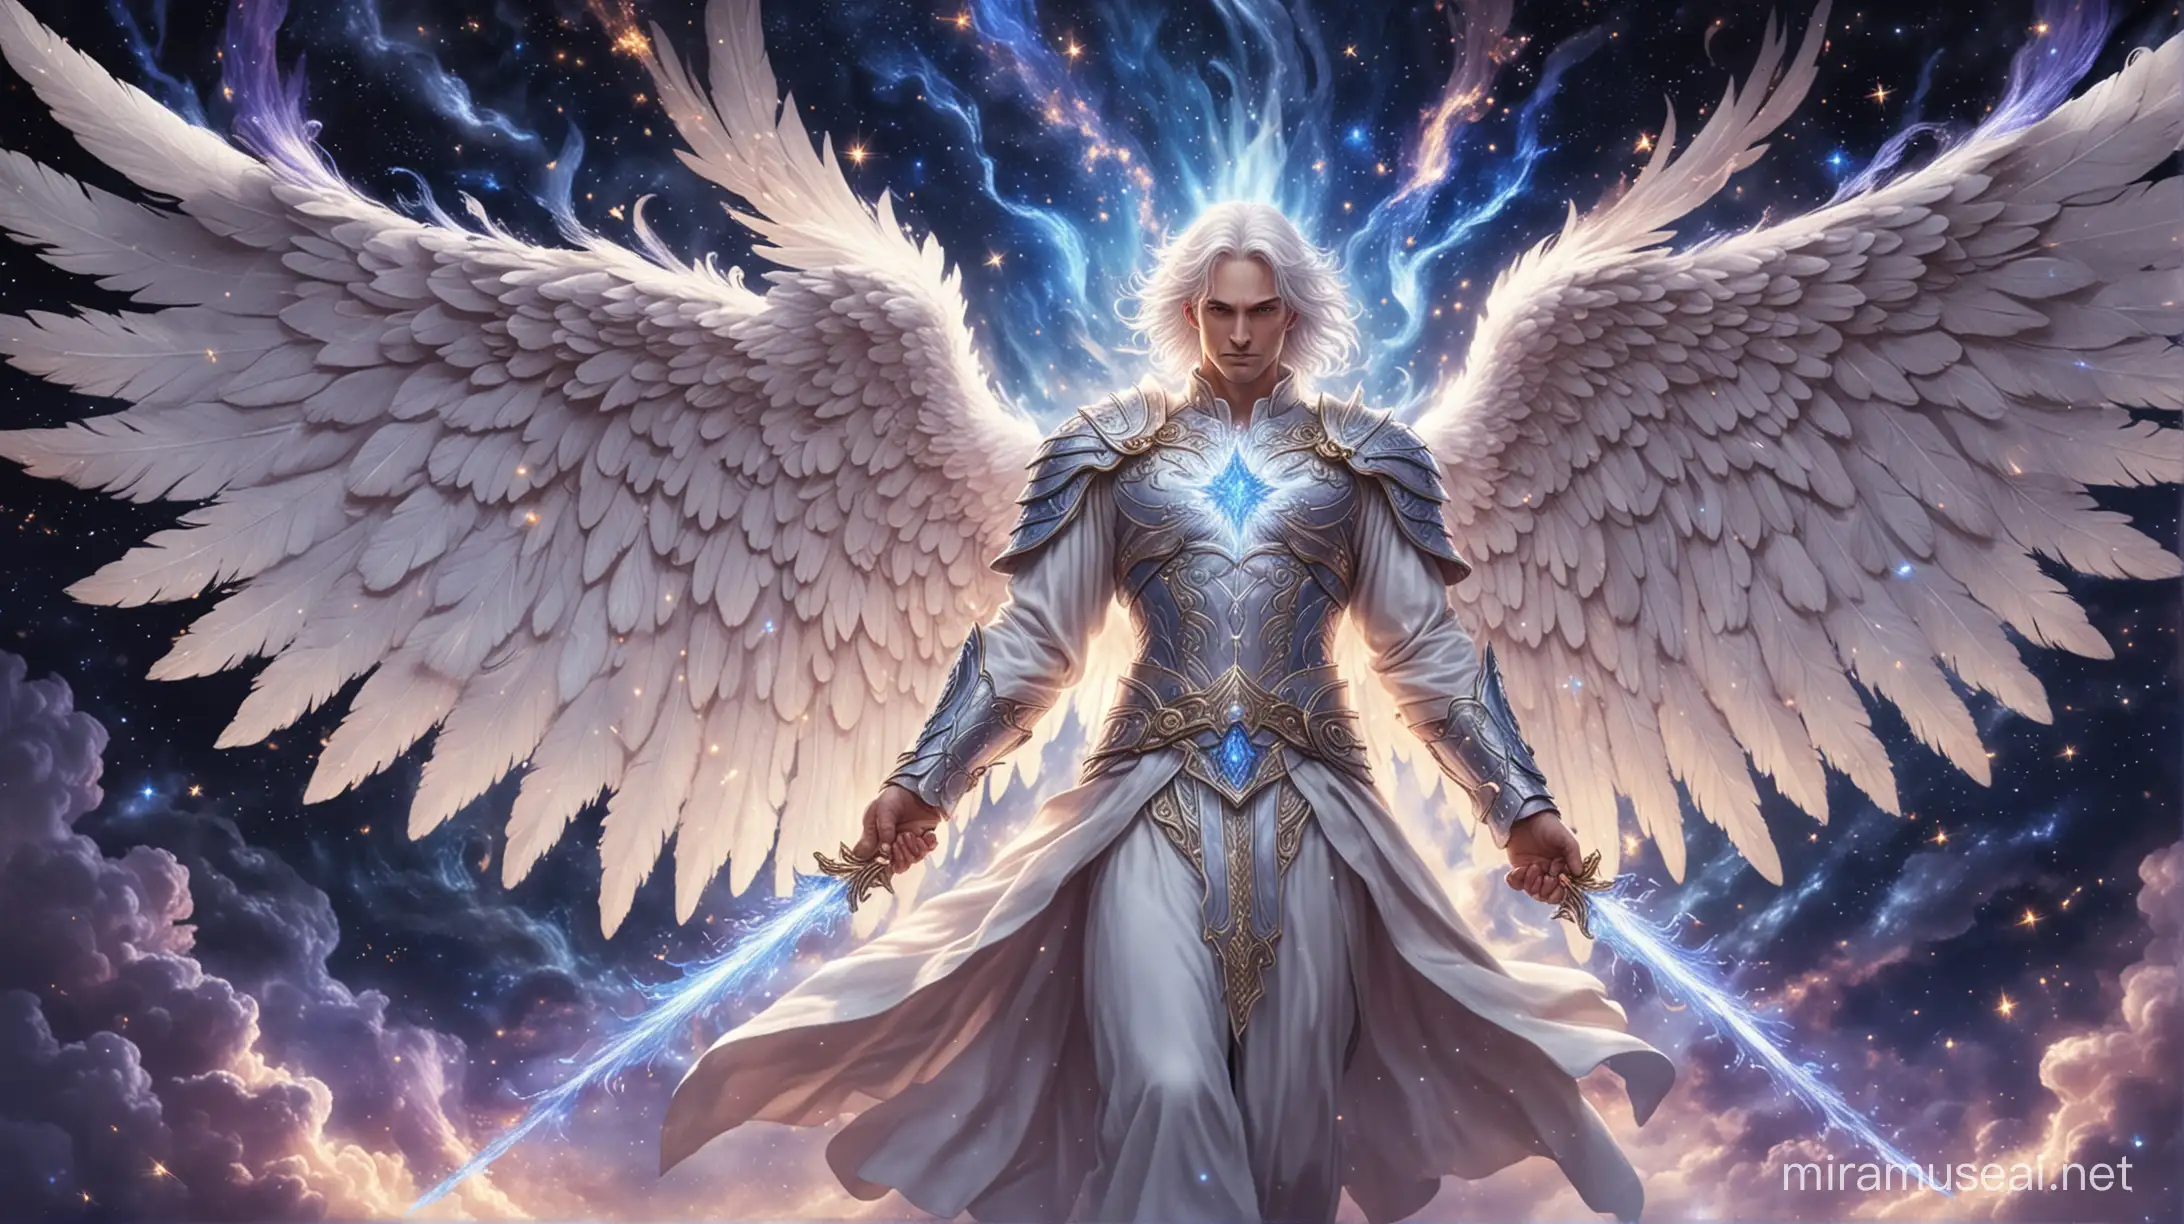 Powerful Guardian Angel with Burning Blue Flames Against Starry Background